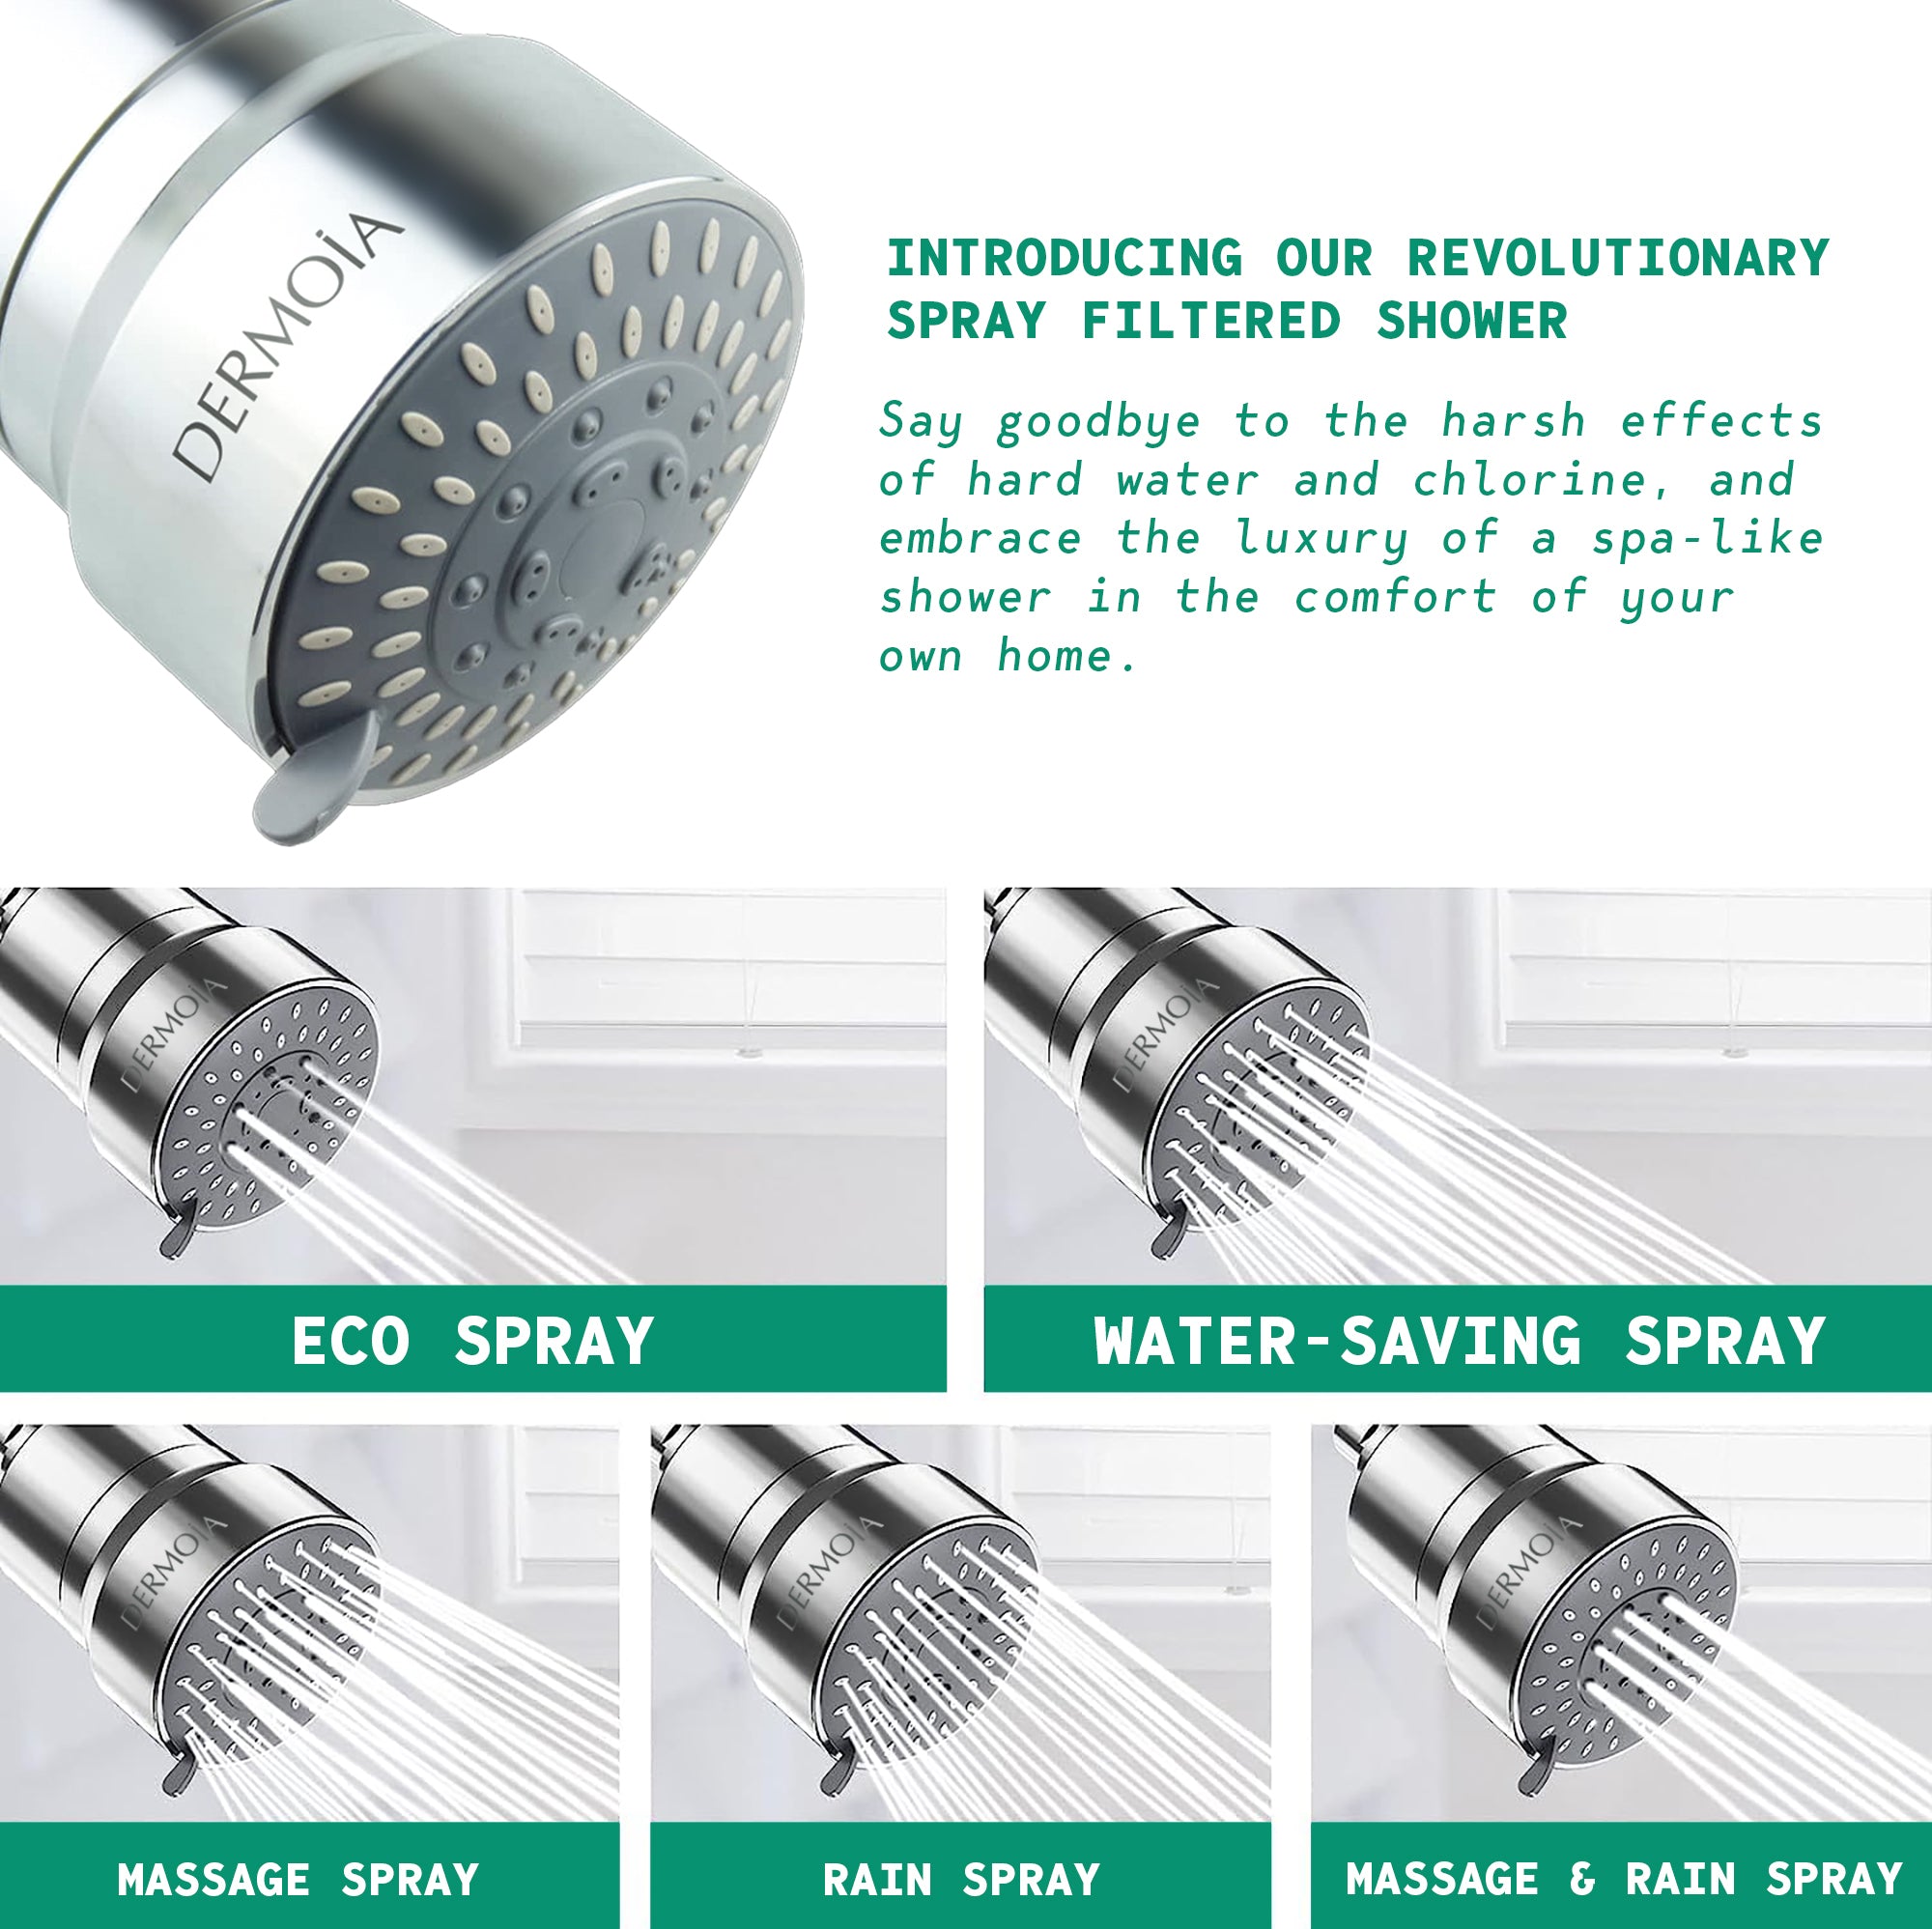 Showerhead Filter, Reduces Toxins & Chemicals